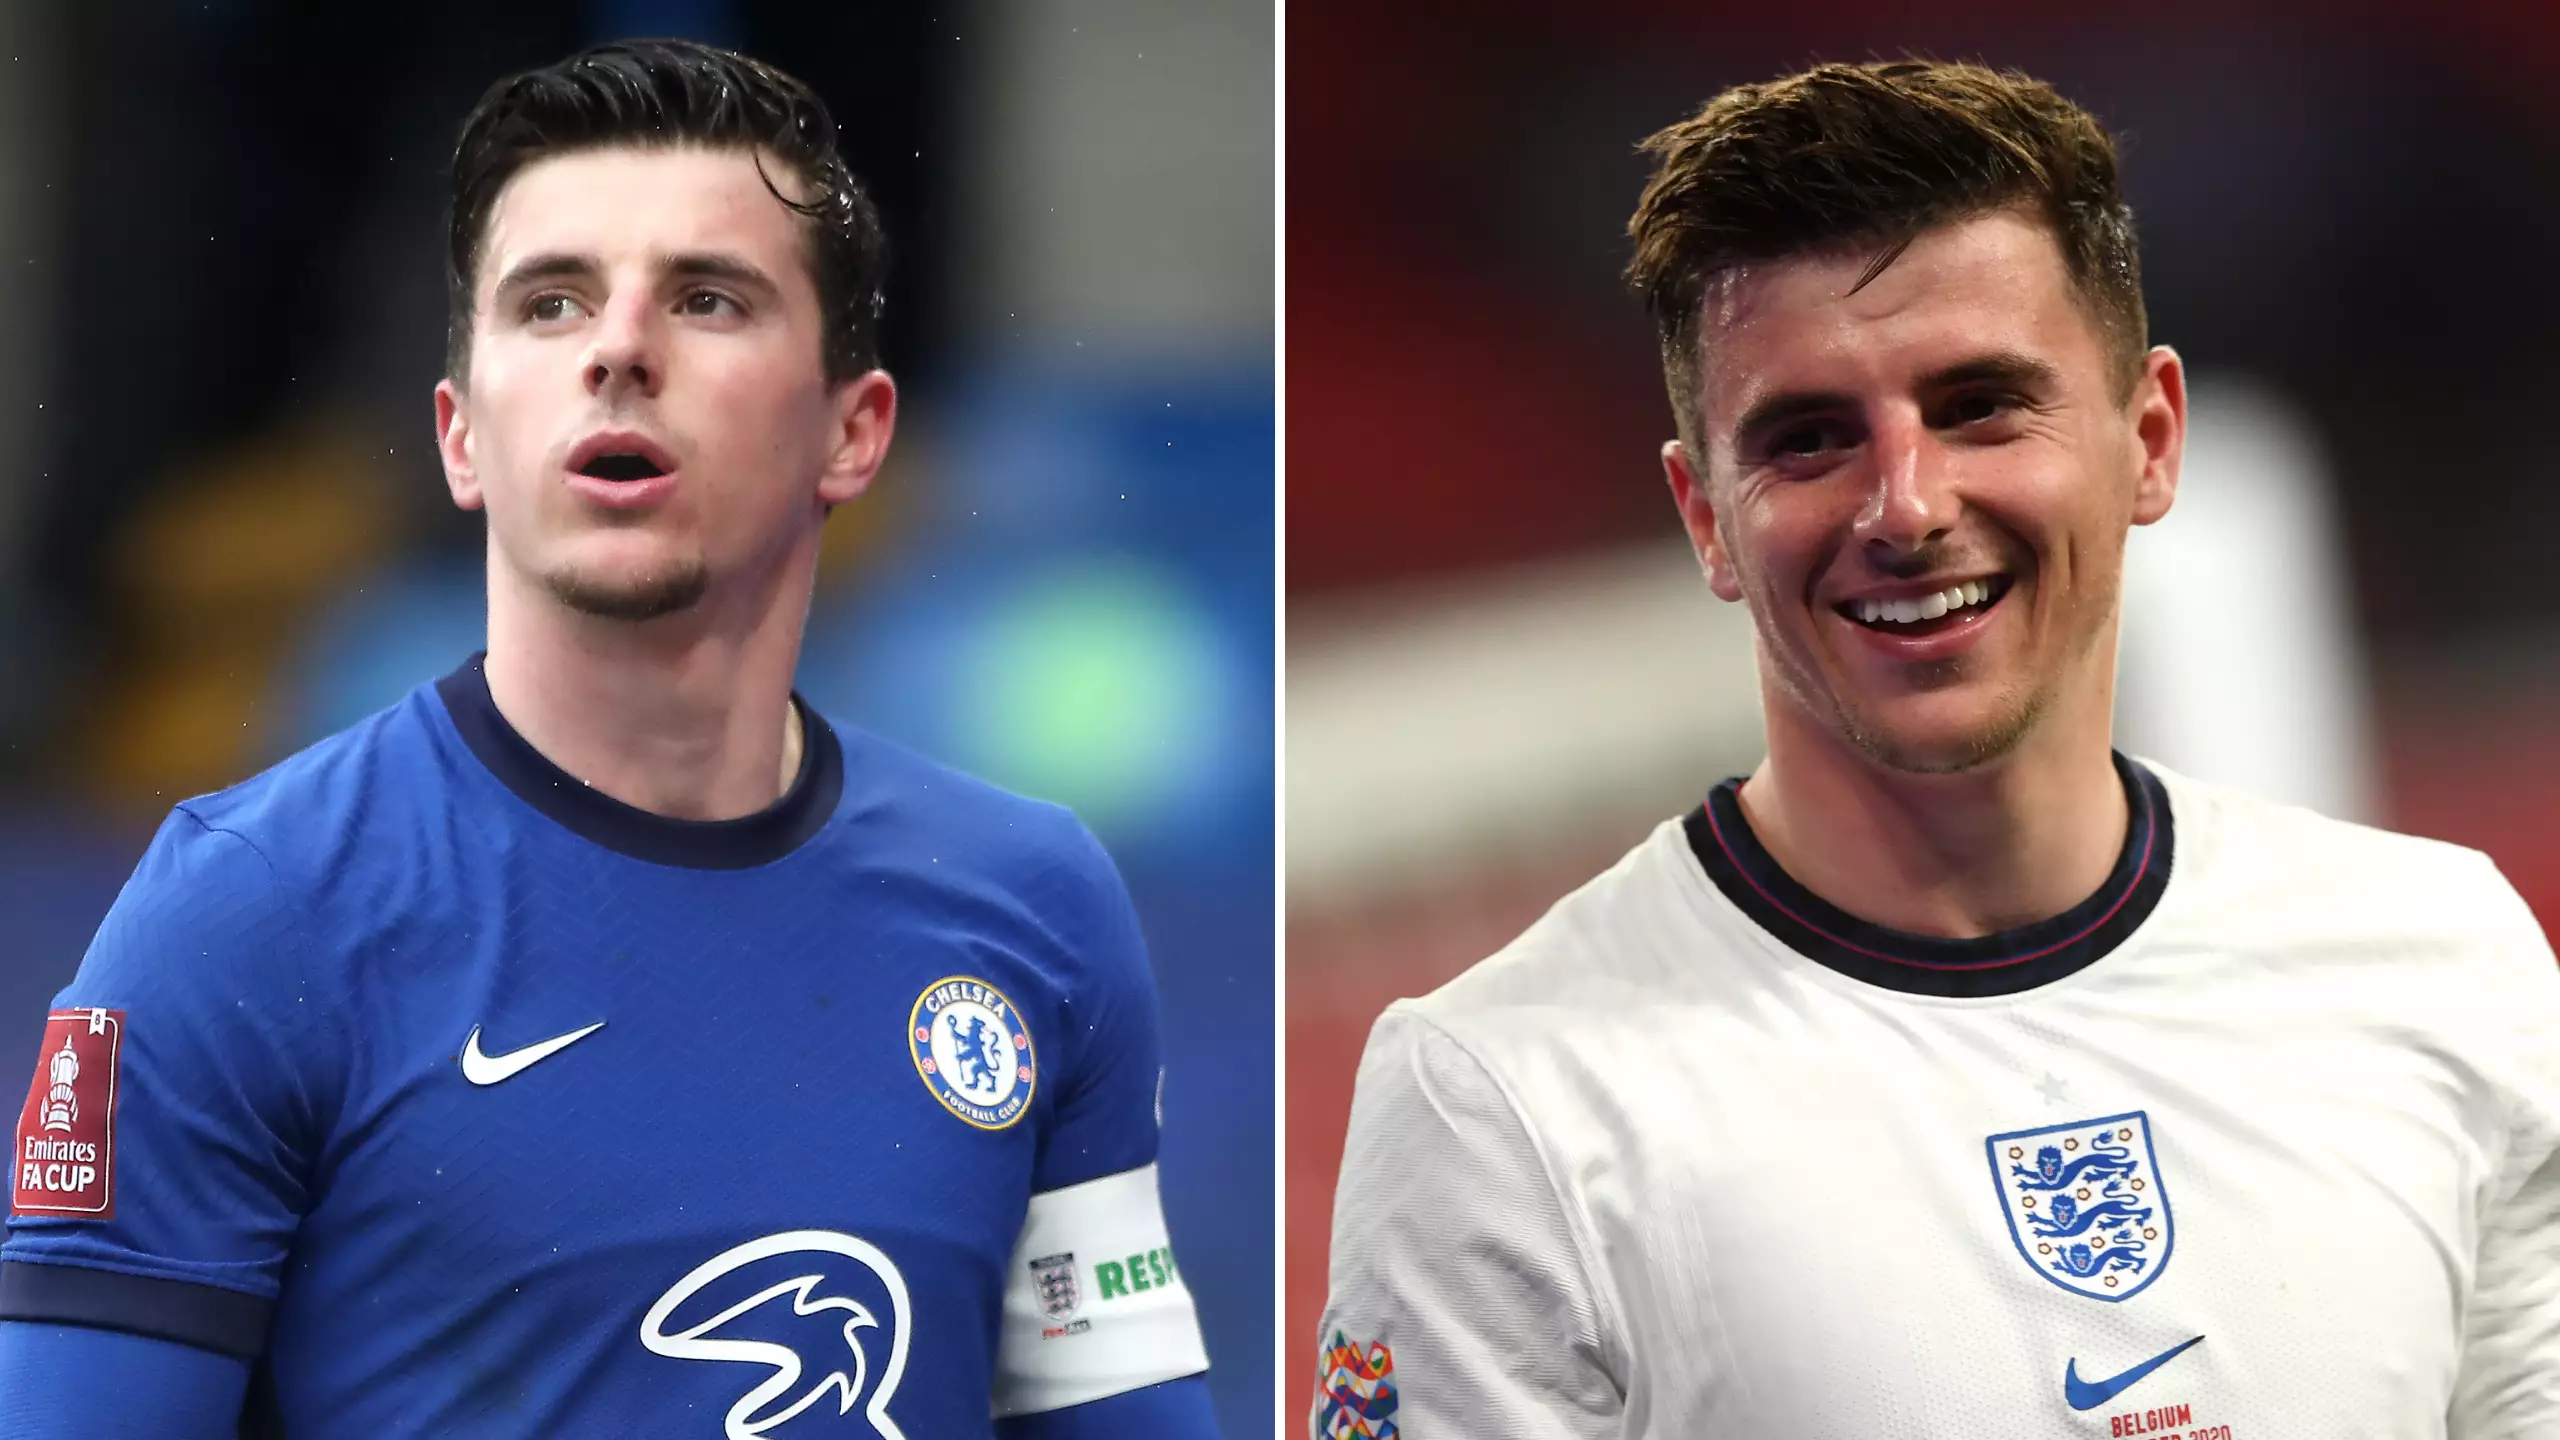 Mason Mount "Will Be Chelsea & England Captain" In The Future